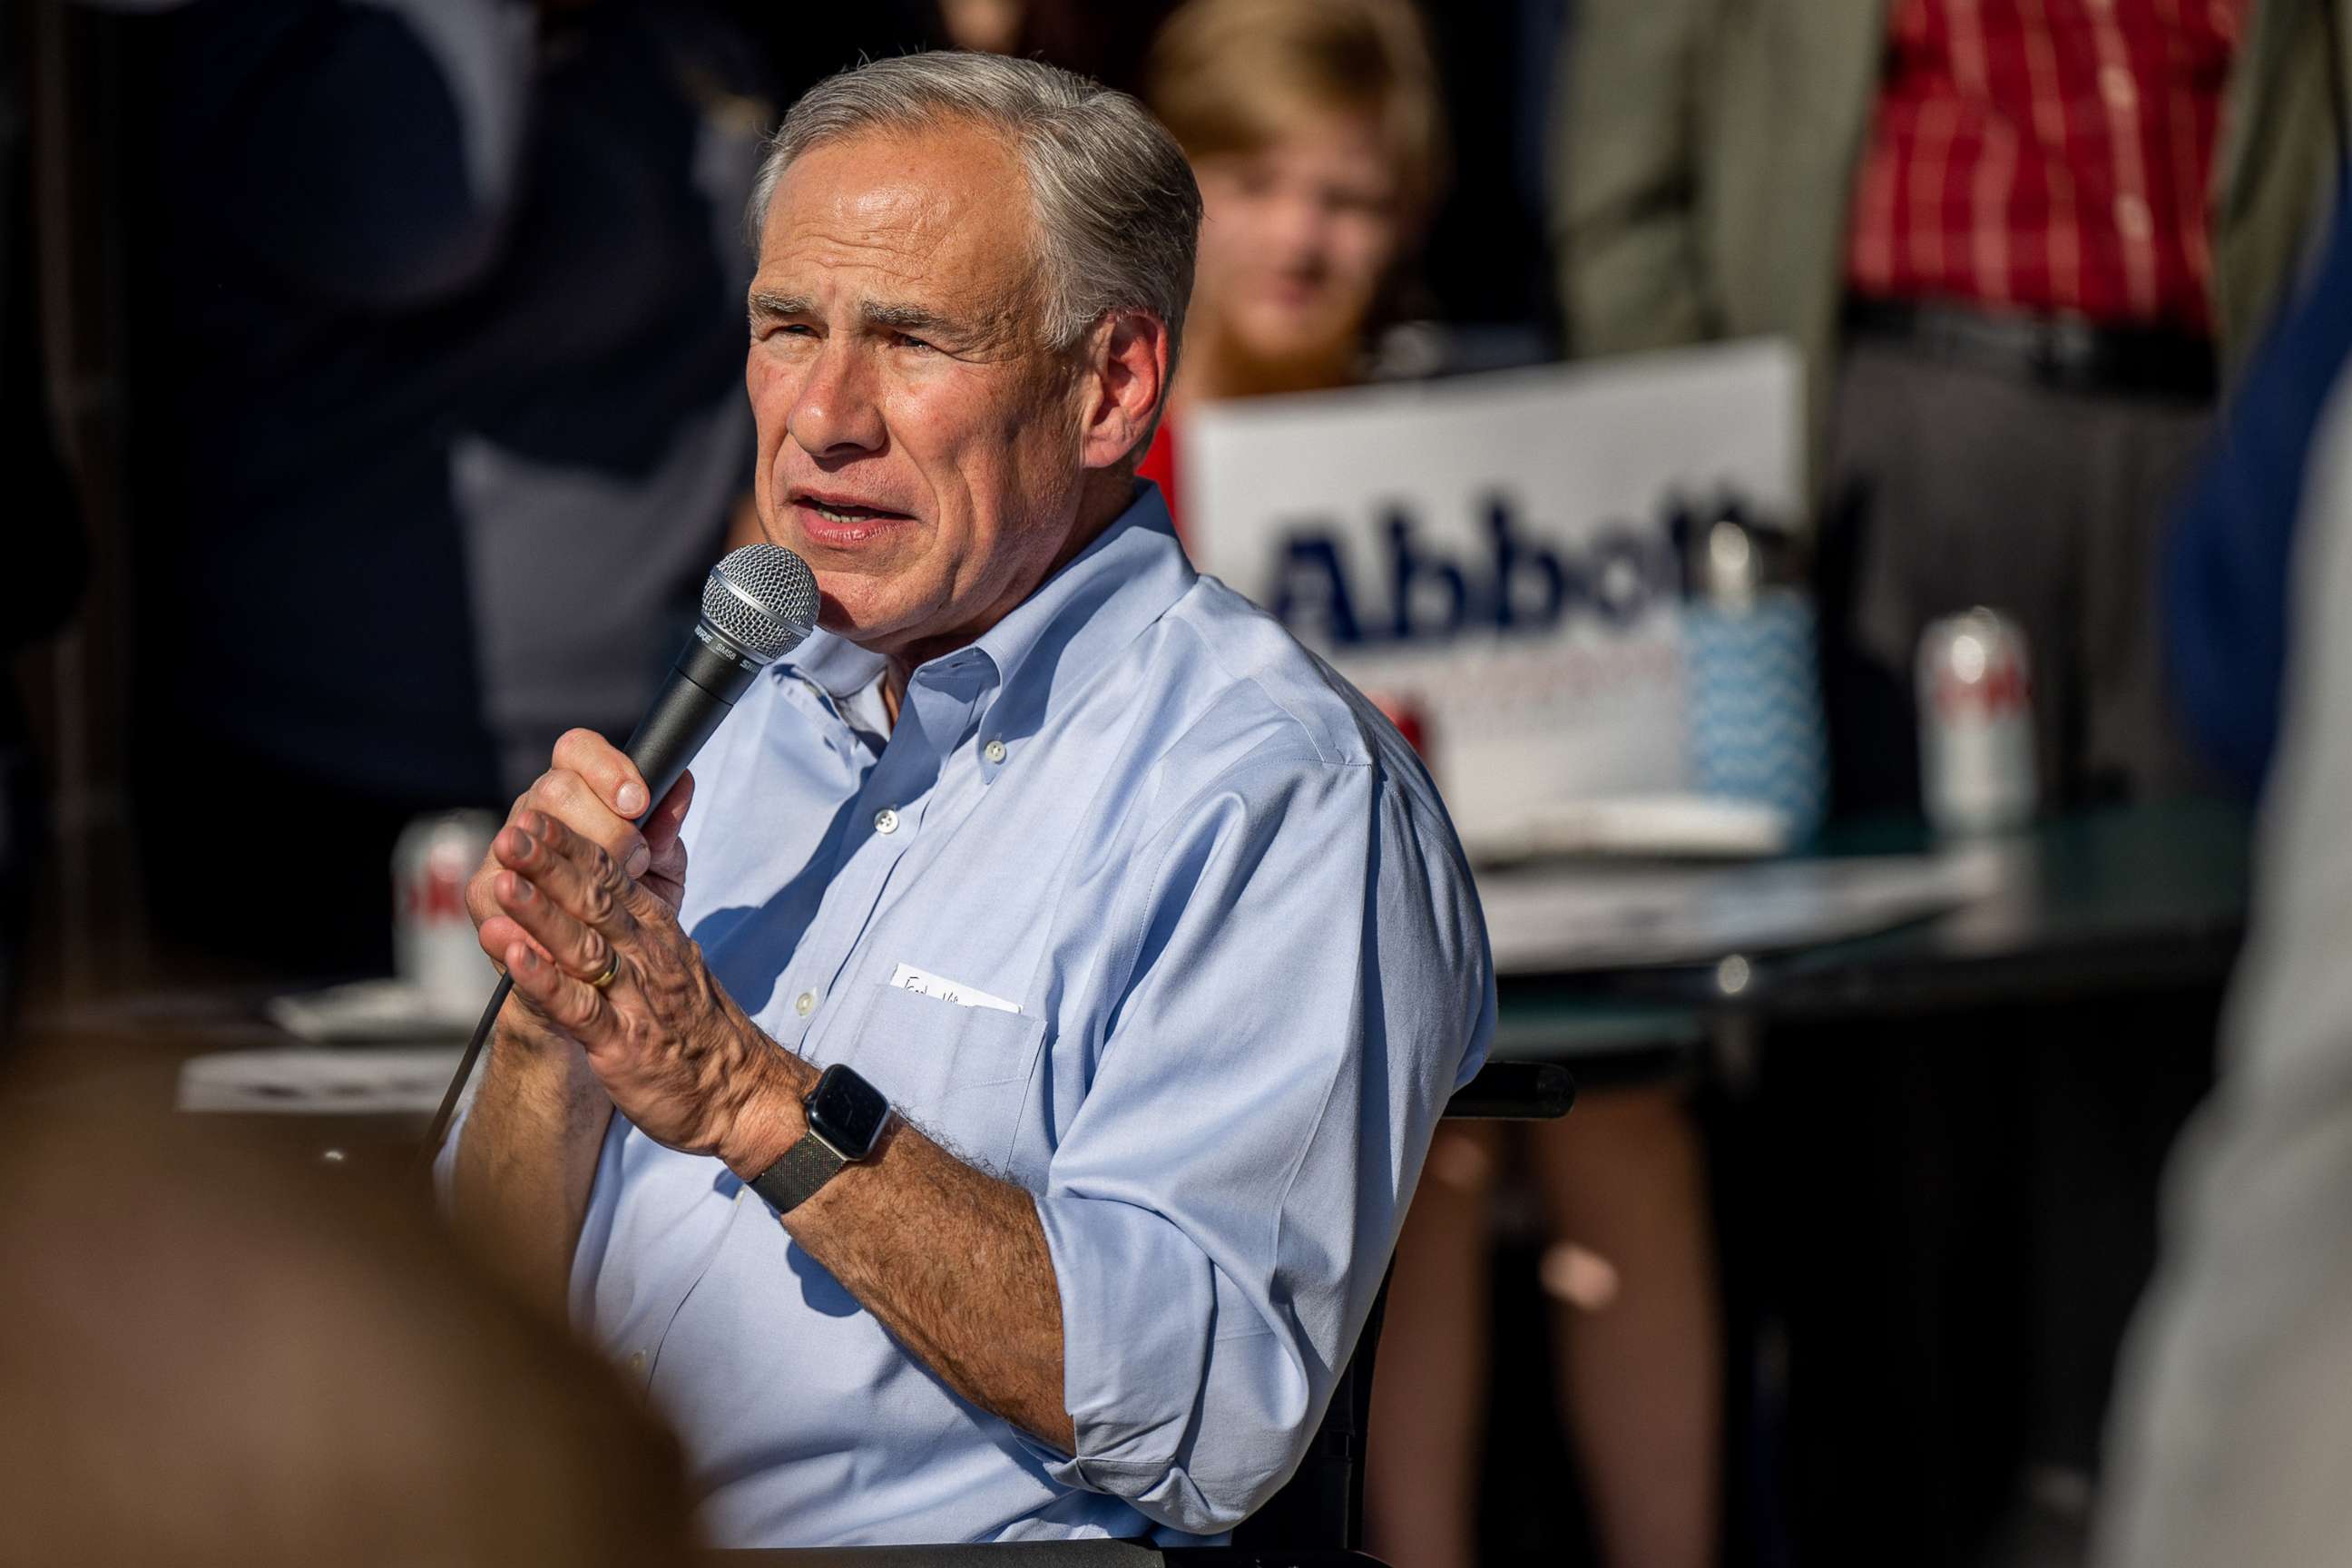 PHOTO: Texas Gov. Greg Abbott speaks during a 'Get Out The Vote' rally on Oct. 27, 2022 in Katy, Texas.